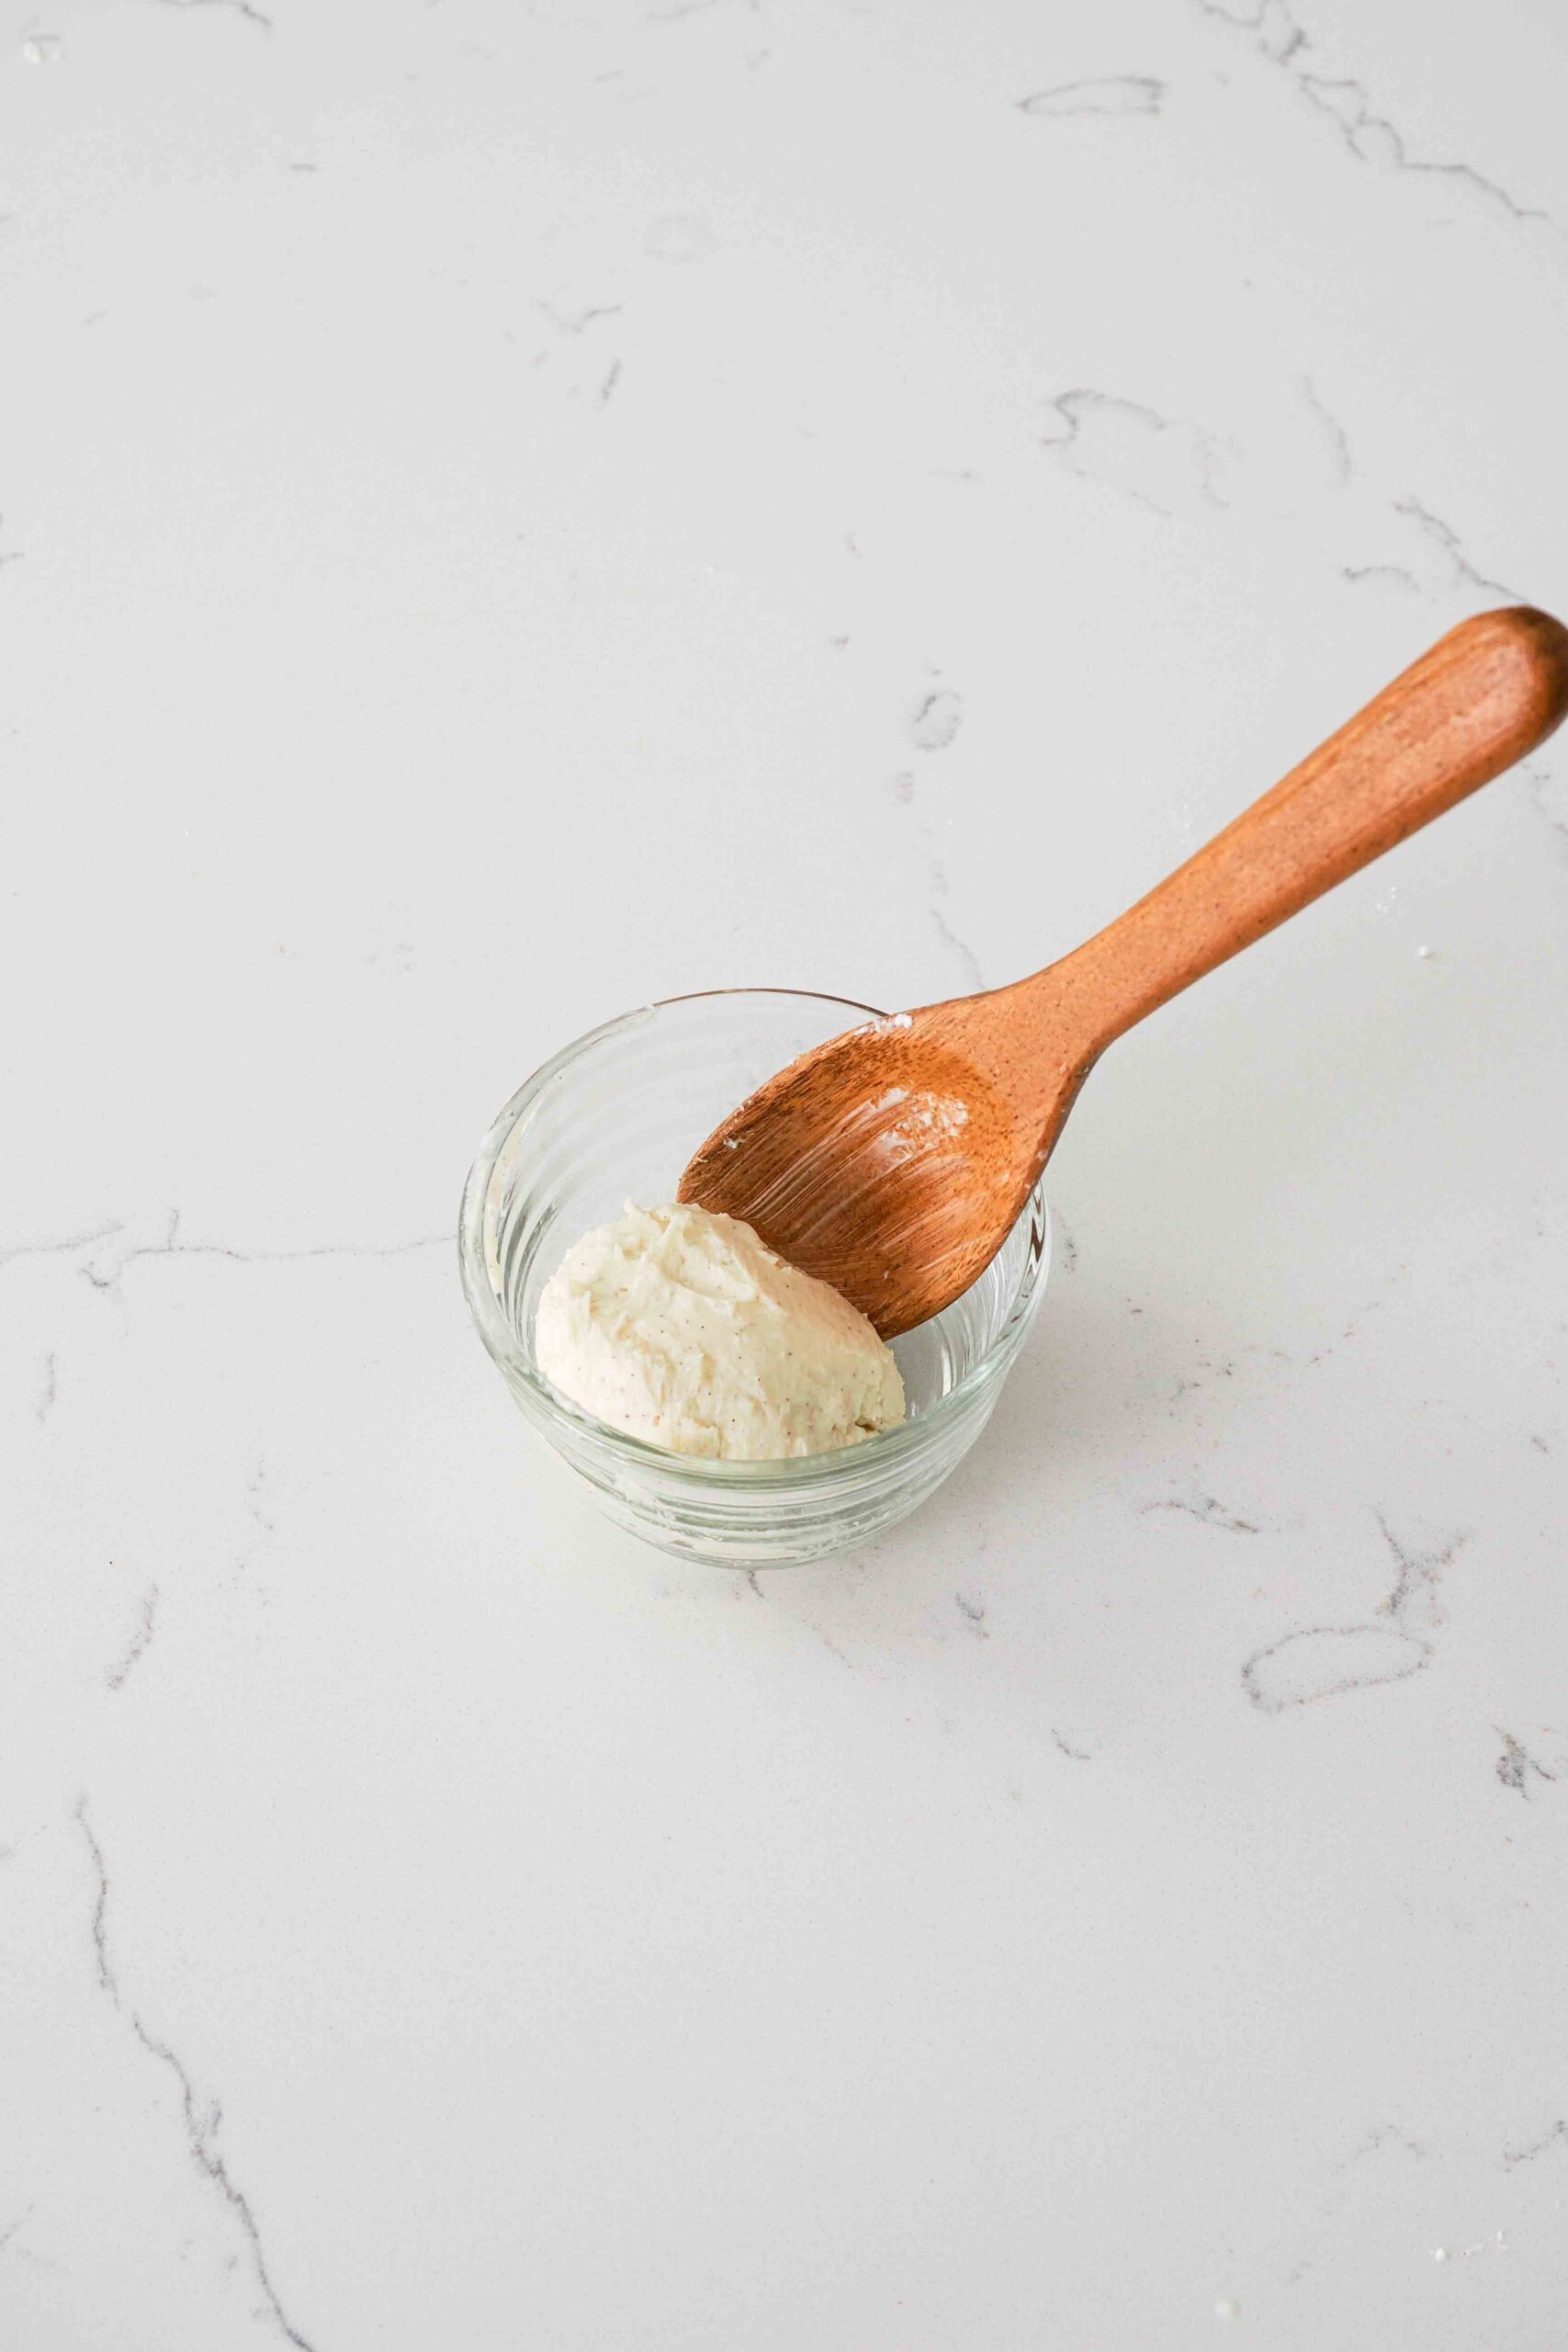 A wooden spoon with a sphere of vanilla bean-speckled homemade butter.